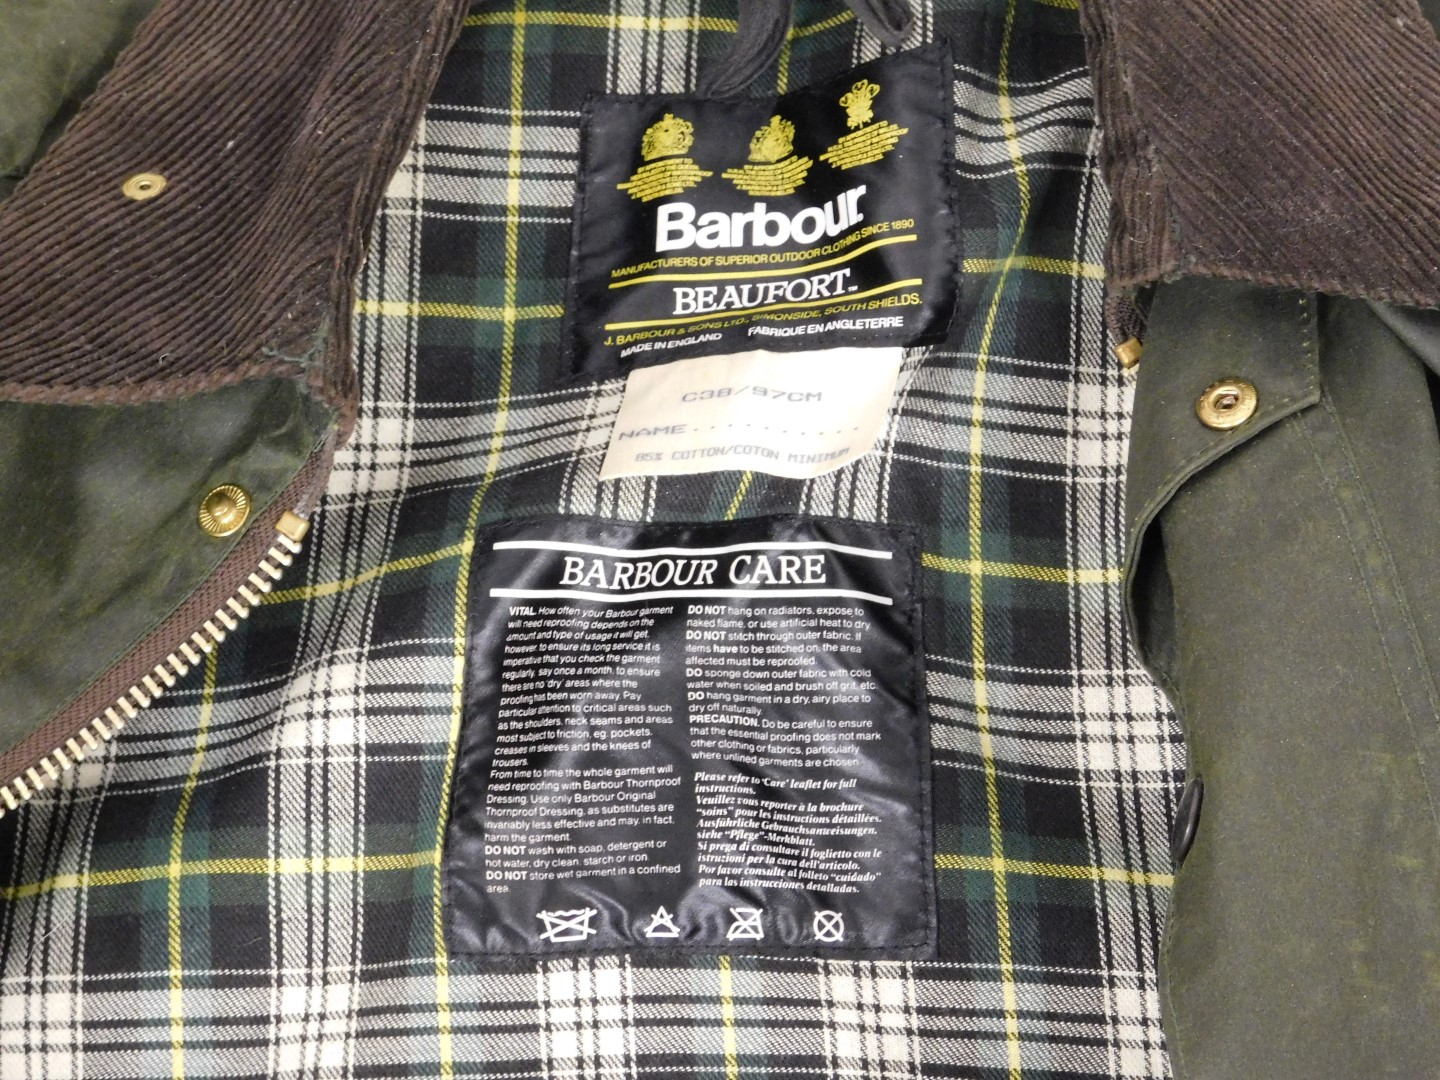 Two Barbour Beaufort jackets, size 38, Barbour hat, and a detachable coat hood, and Blue Ribband gre - Image 3 of 4